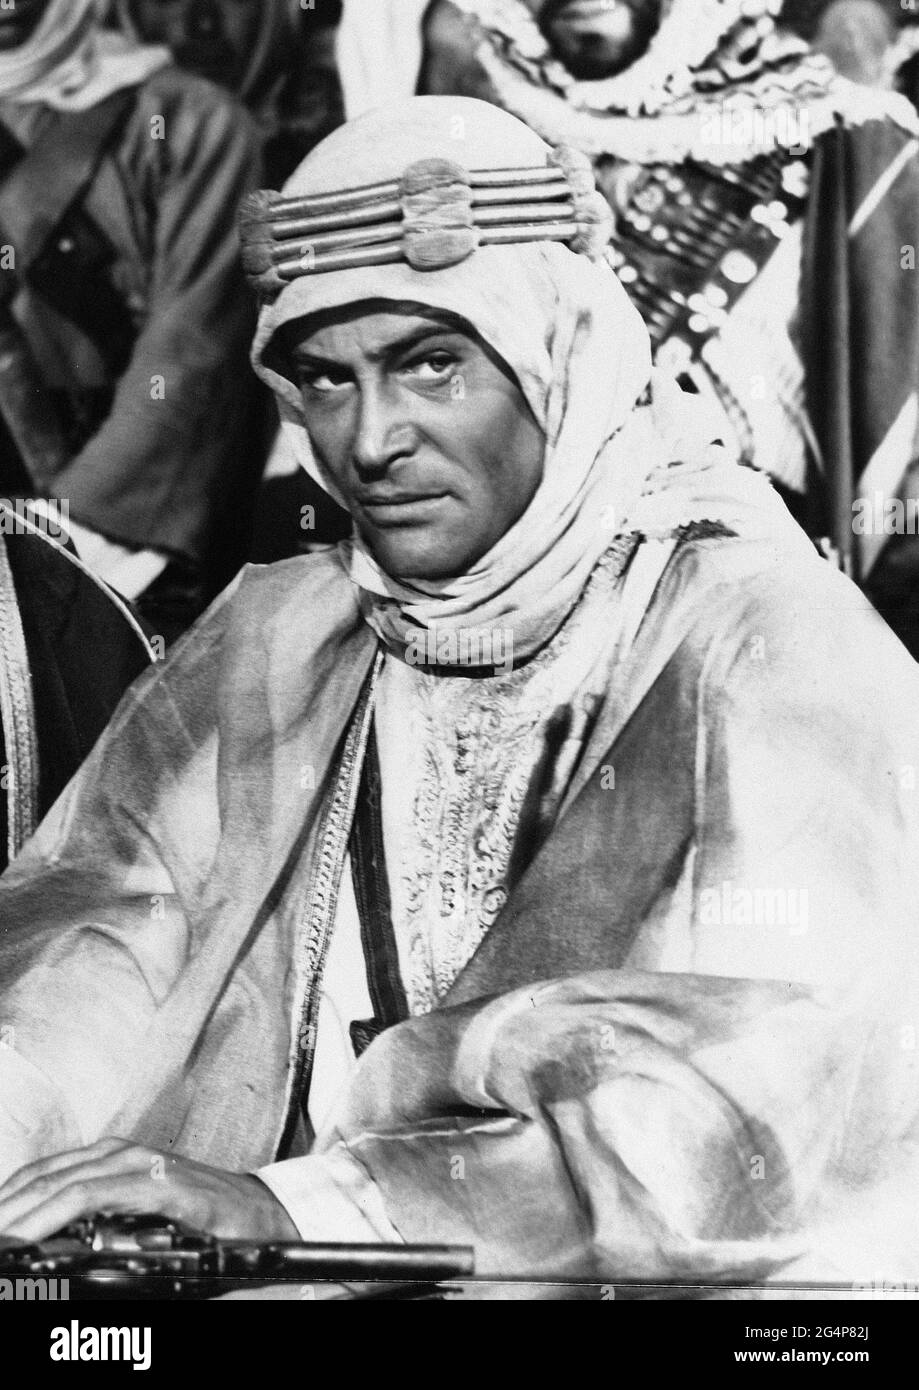 Peter O'Toole, 'Lawrence of Arabia' (1962) Columbia Pictures / File Reference # 34145-241THA Stock Photo